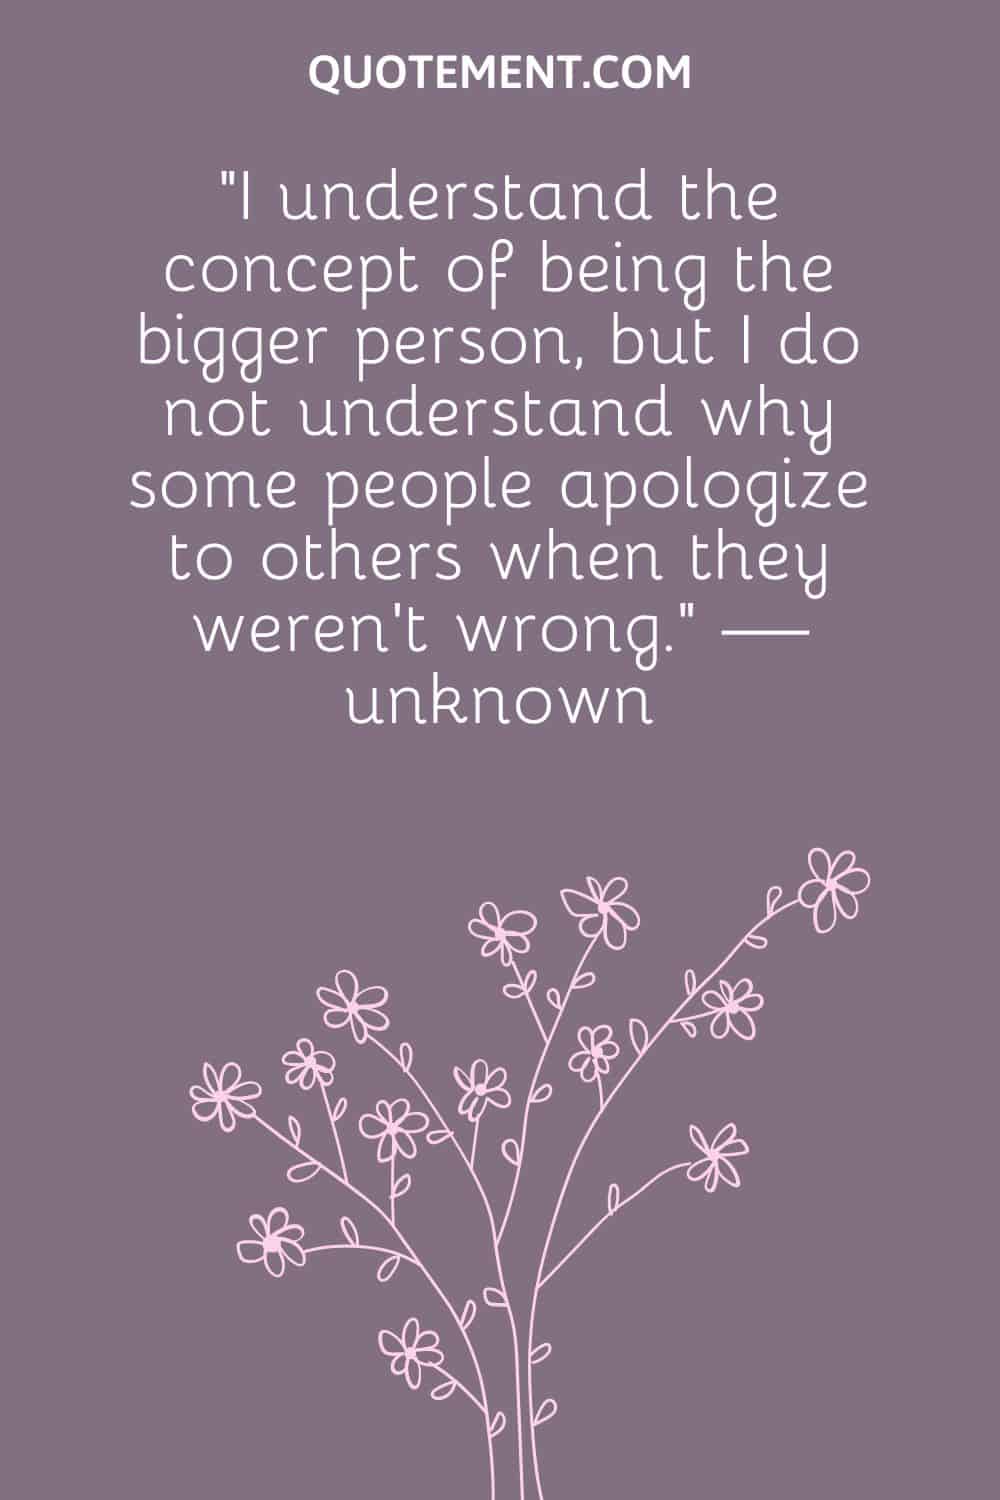 “I understand the concept of being the bigger person, but I do not understand why some people apologize to others when they weren’t wrong.” — unknown